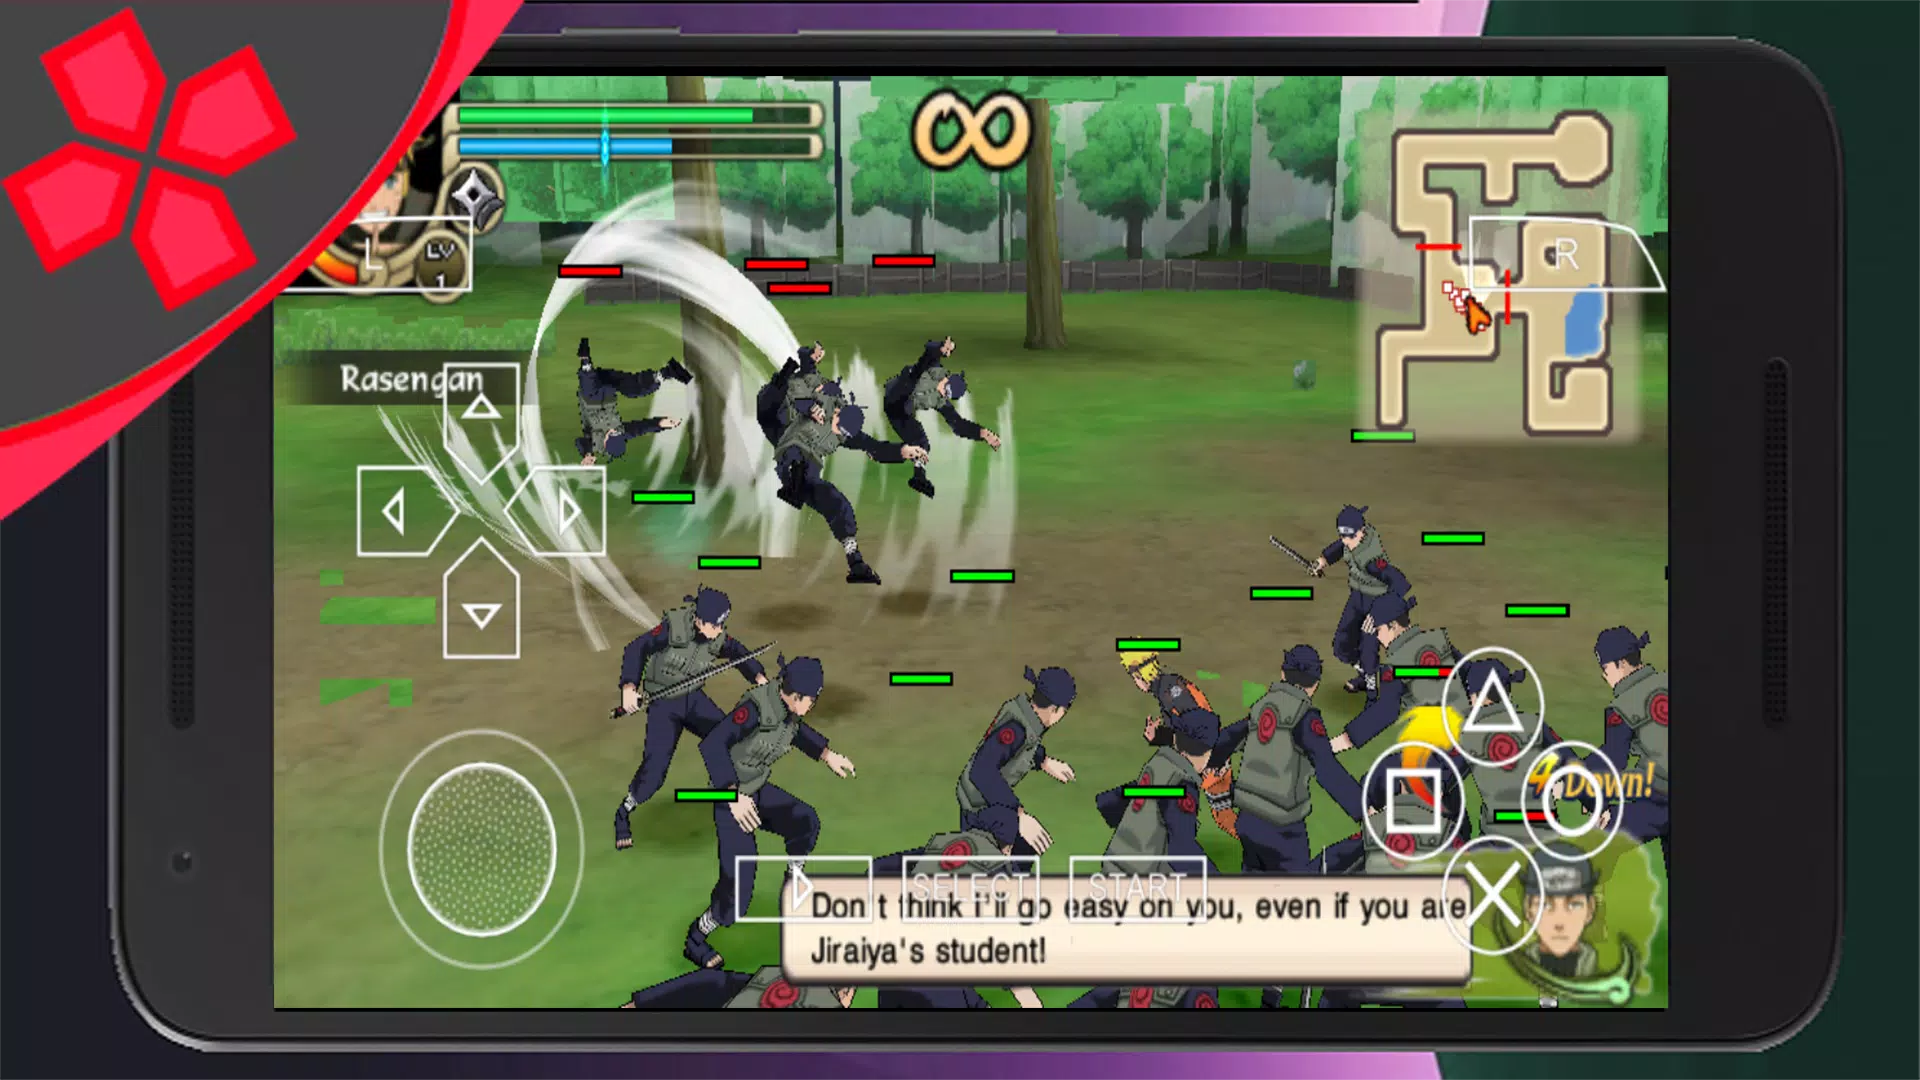 Download Naruto Shippuden Ultimate Ninja 5 Game on Android, AetherSX2 +  Savedata